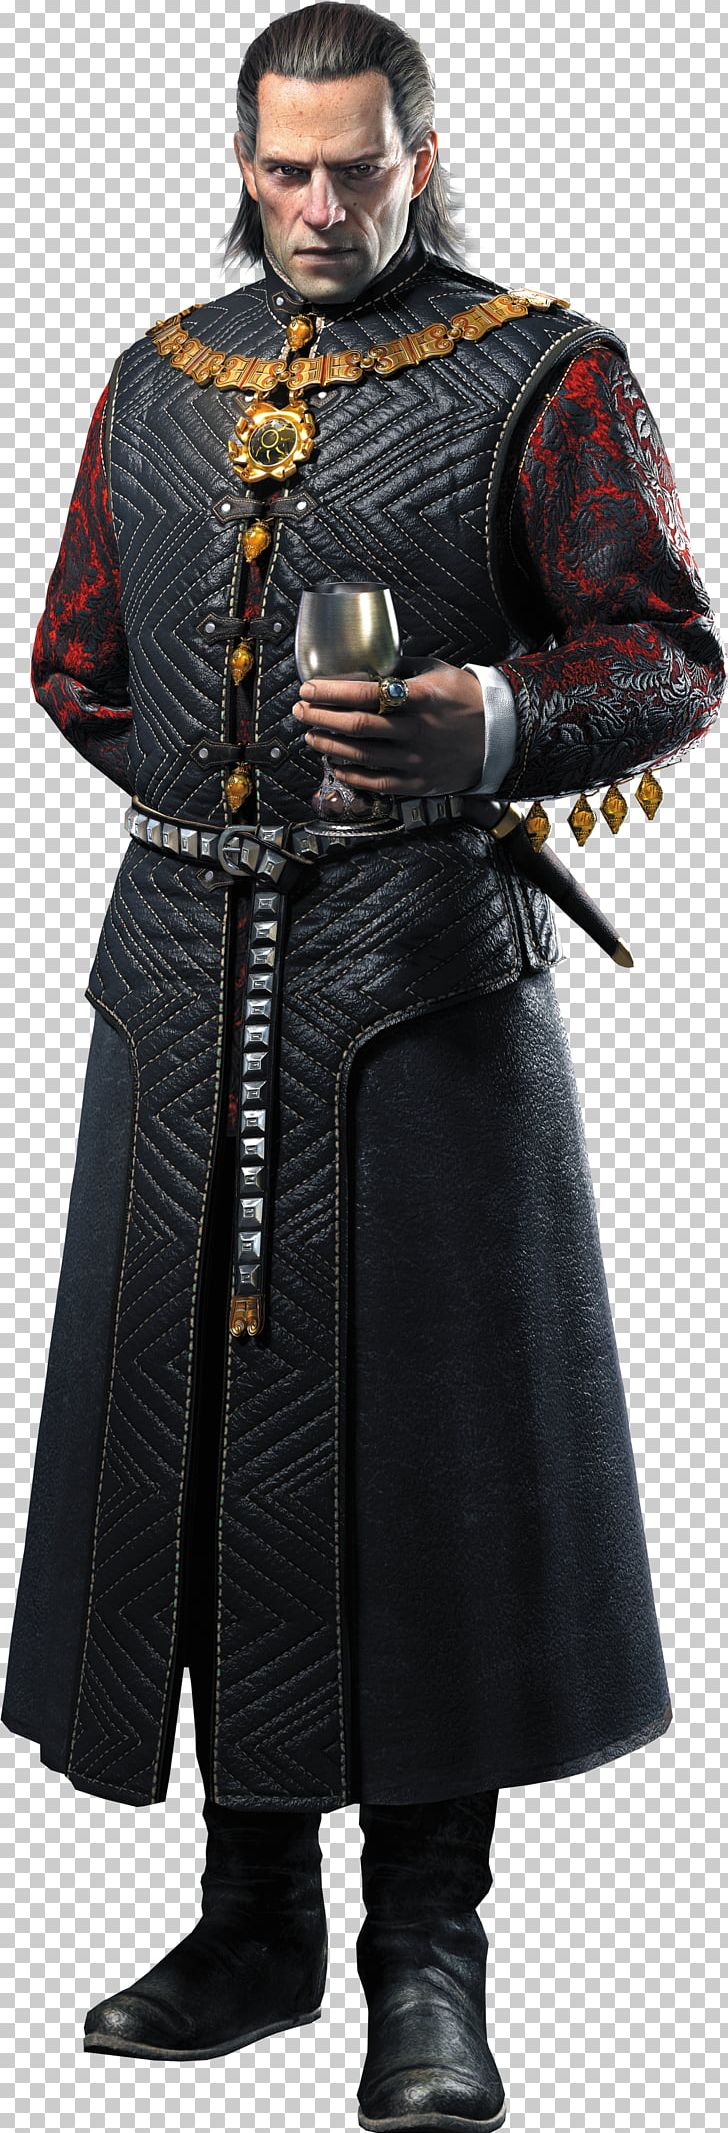 The Witcher 3: Wild Hunt Geralt Of Rivia The Witcher 3: Hearts Of Stone Gwent: The Witcher Card Game PNG, Clipart, Armour, Ciri, Costume, Emhyr Var Emreis, Game Free PNG Download